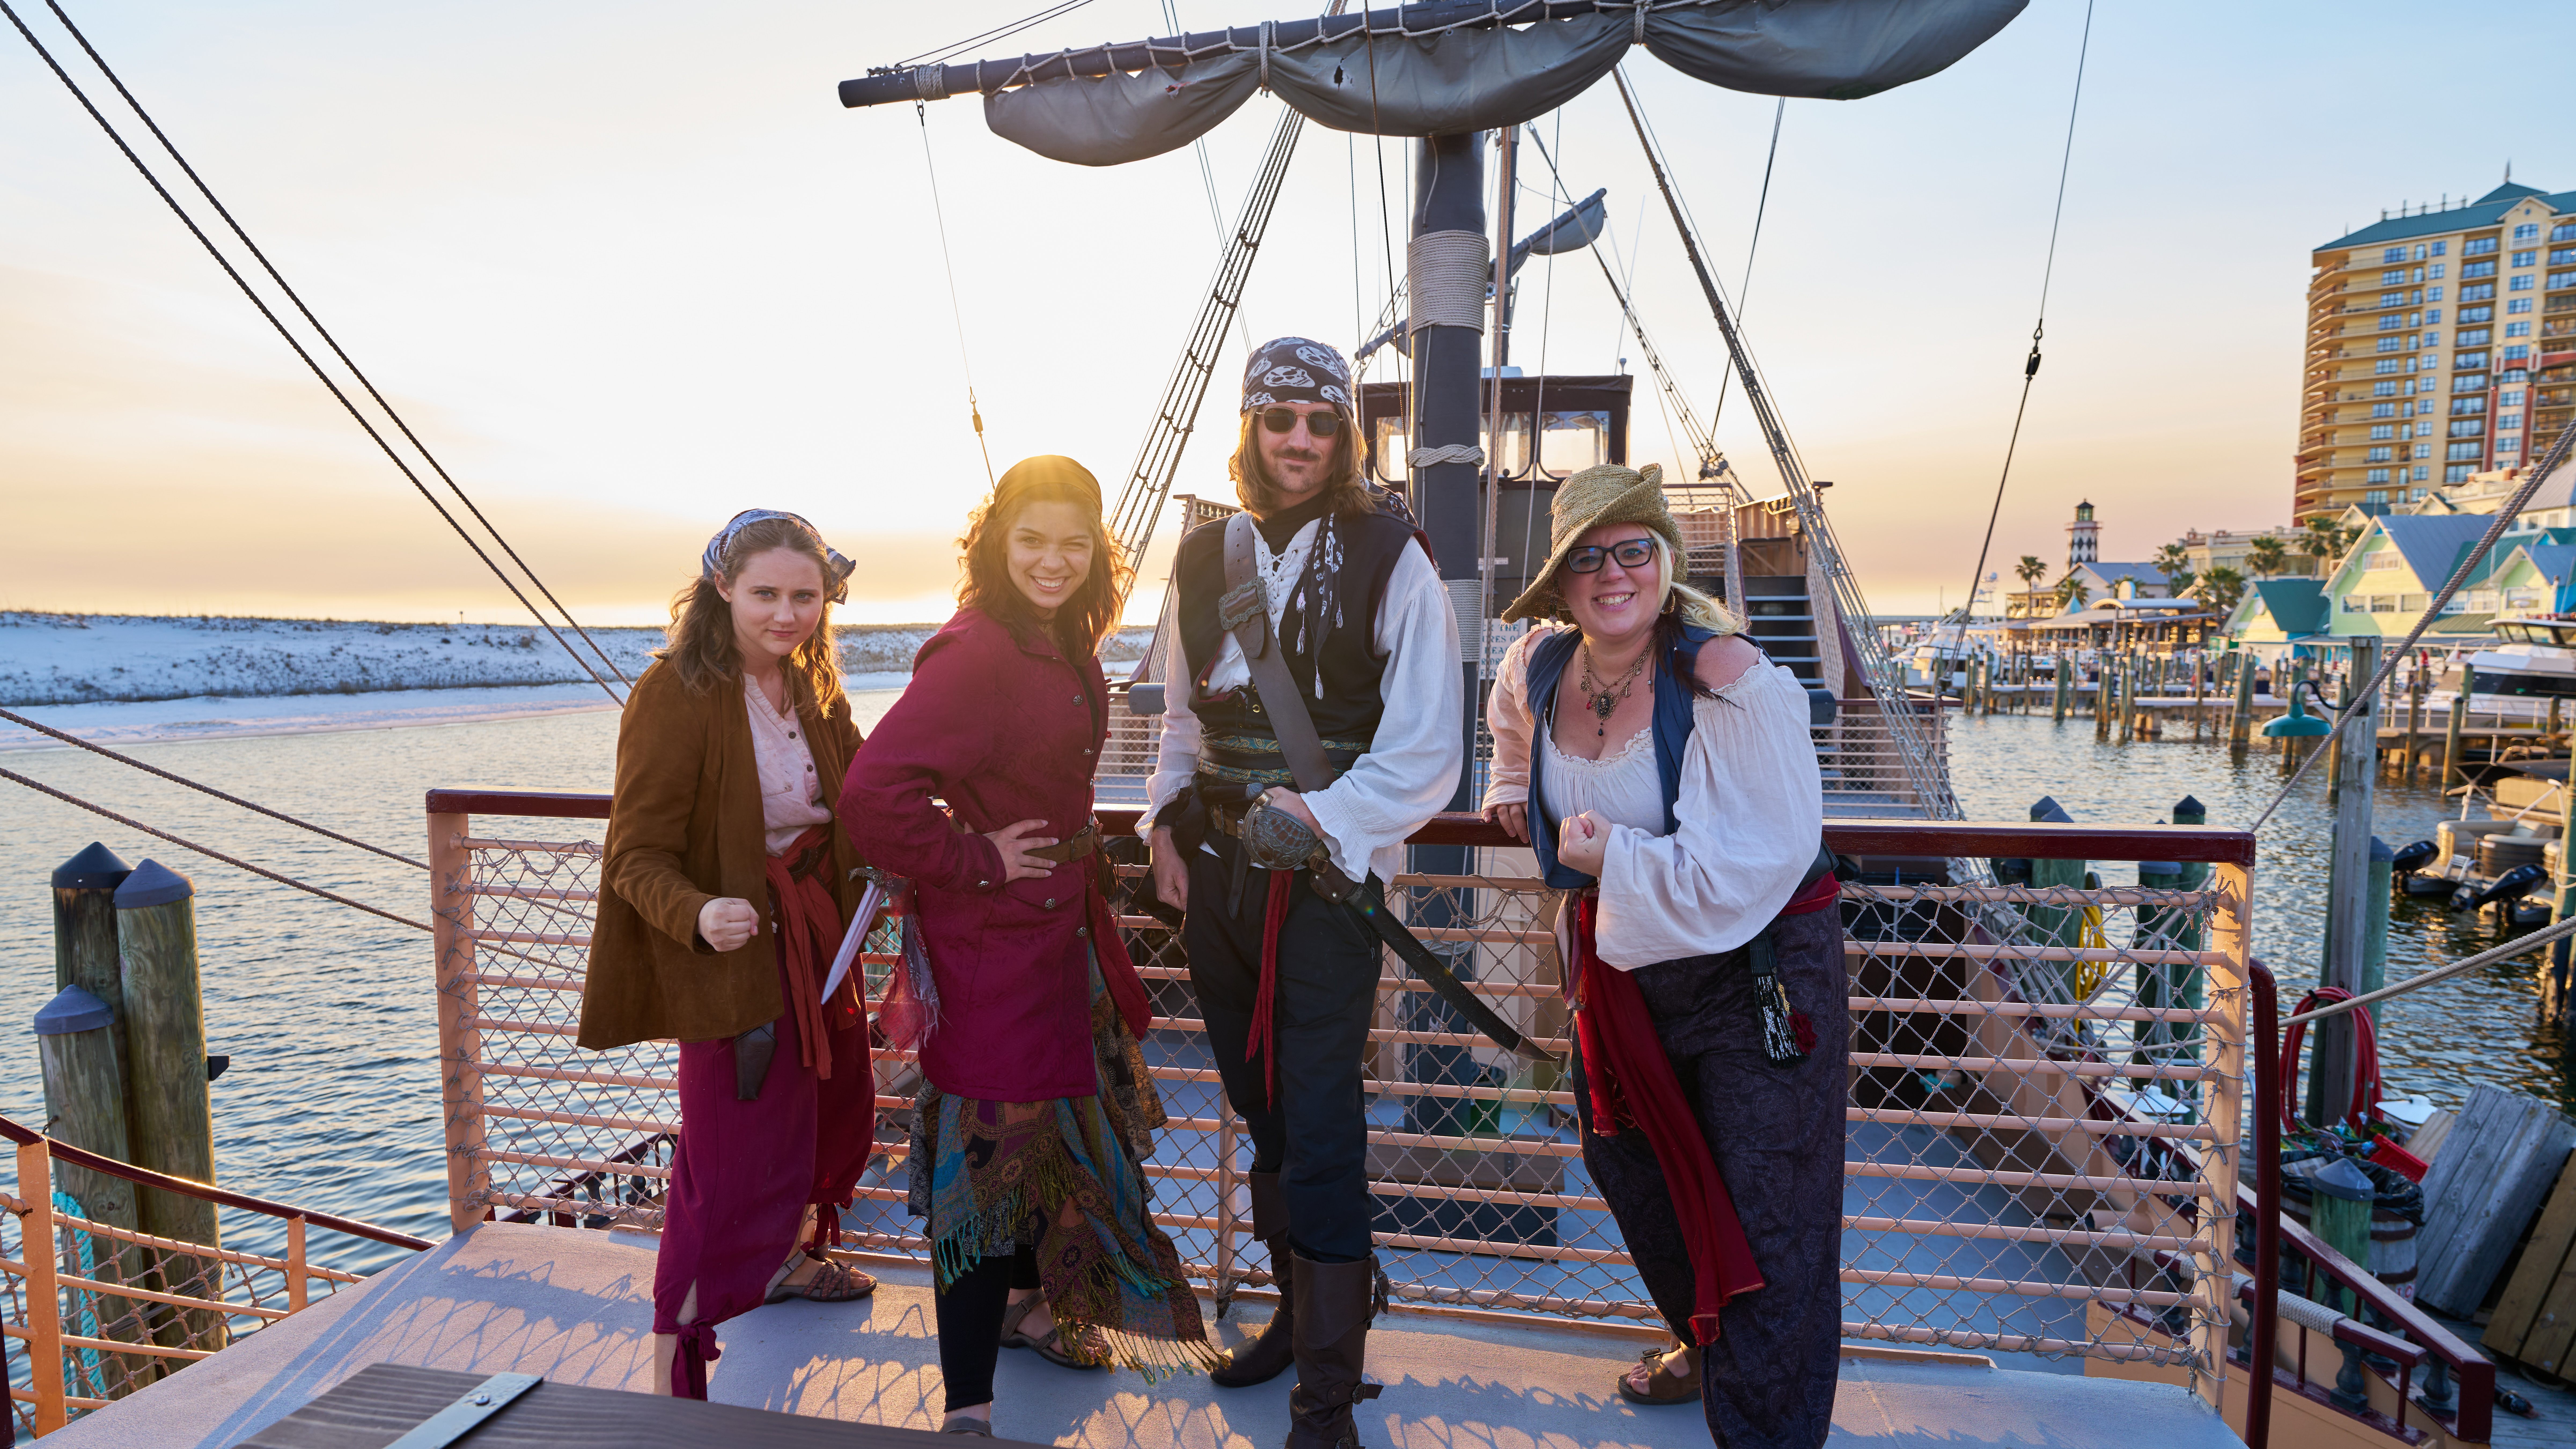 Dressing up in your best pirate garb is encouraged aboard Destin’s Buccaneer Pirate Cruise.